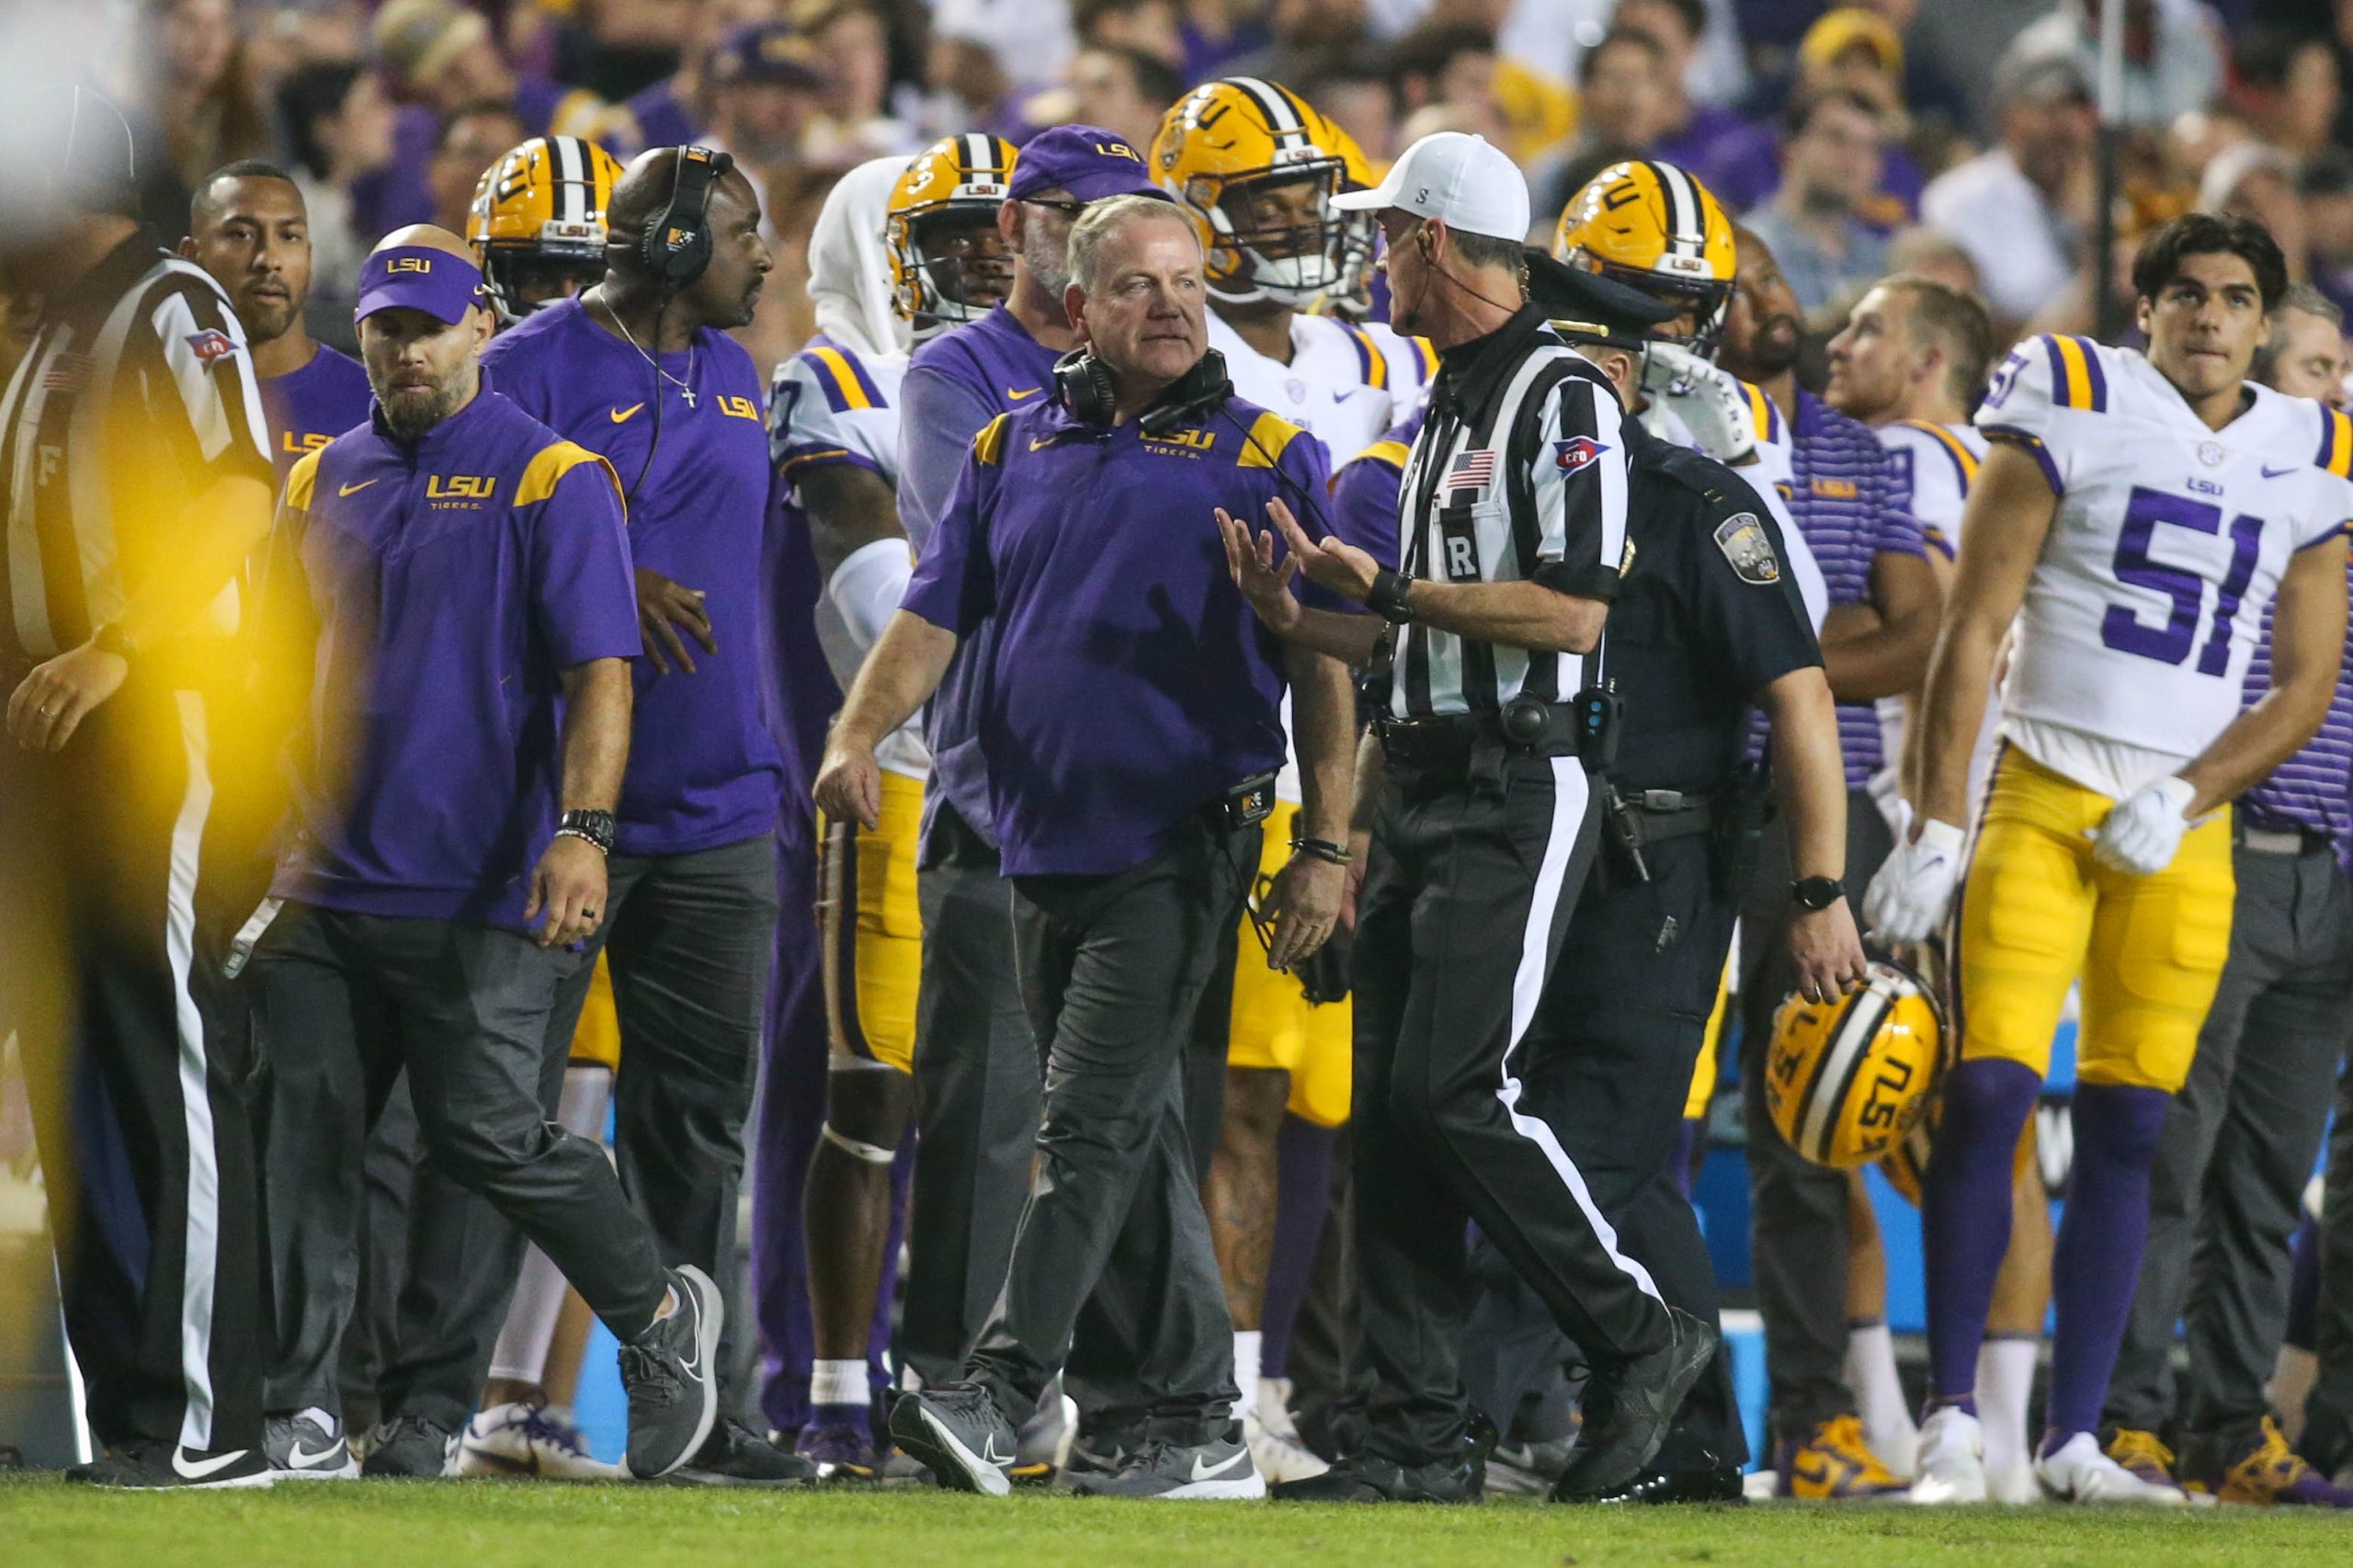 Brian Kelly says LSU not the team 'I thought we were' following